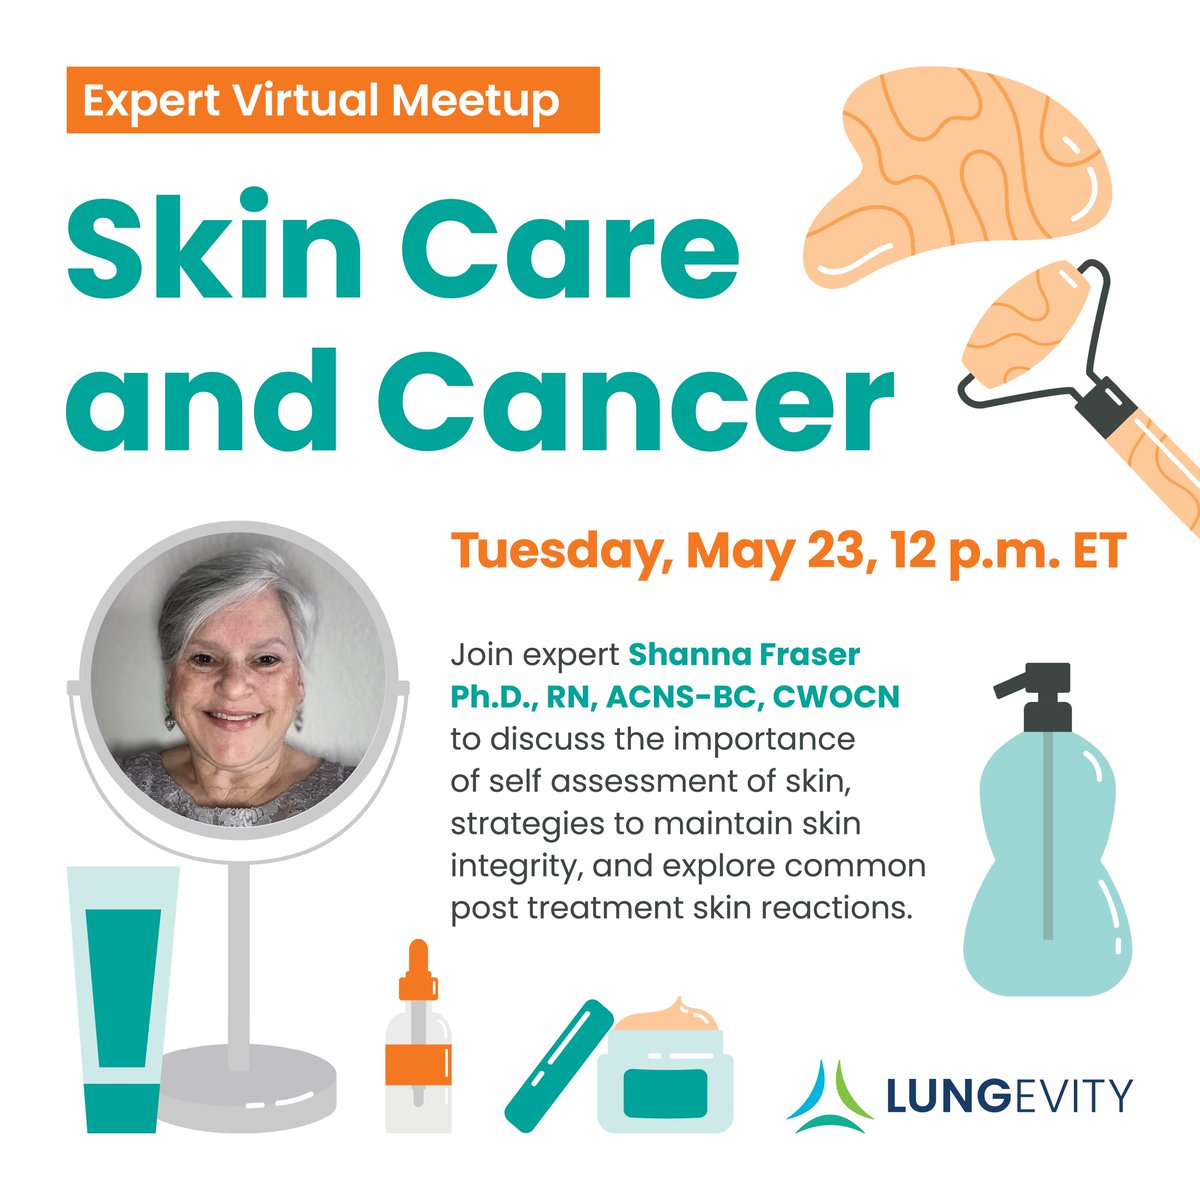 Has treatment for lung cancer changed your skin? Join us tomorrow, May23, with expert Shanna Fraser, to dissuss the importance of skin care and explore common post treatment skin reactions. Sign up for free here: lungevity.org/events

#livingwithlungcancer #lcsm